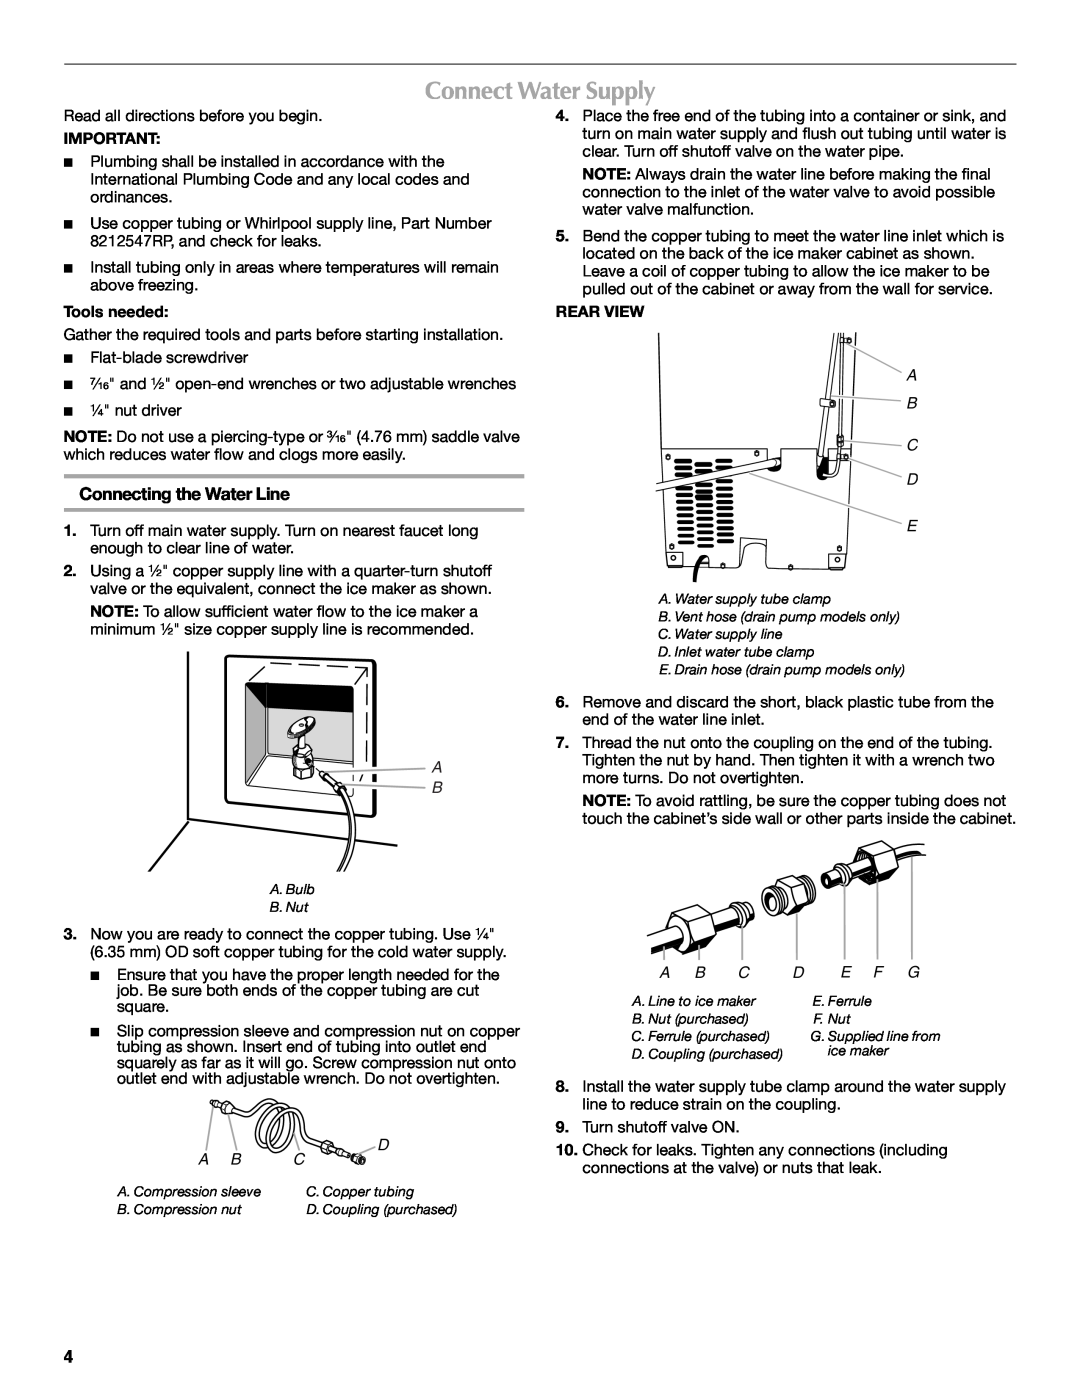 Maytag W10206488A installation instructions Connect Water Supply, Connecting the Water Line, A B C D E F G 